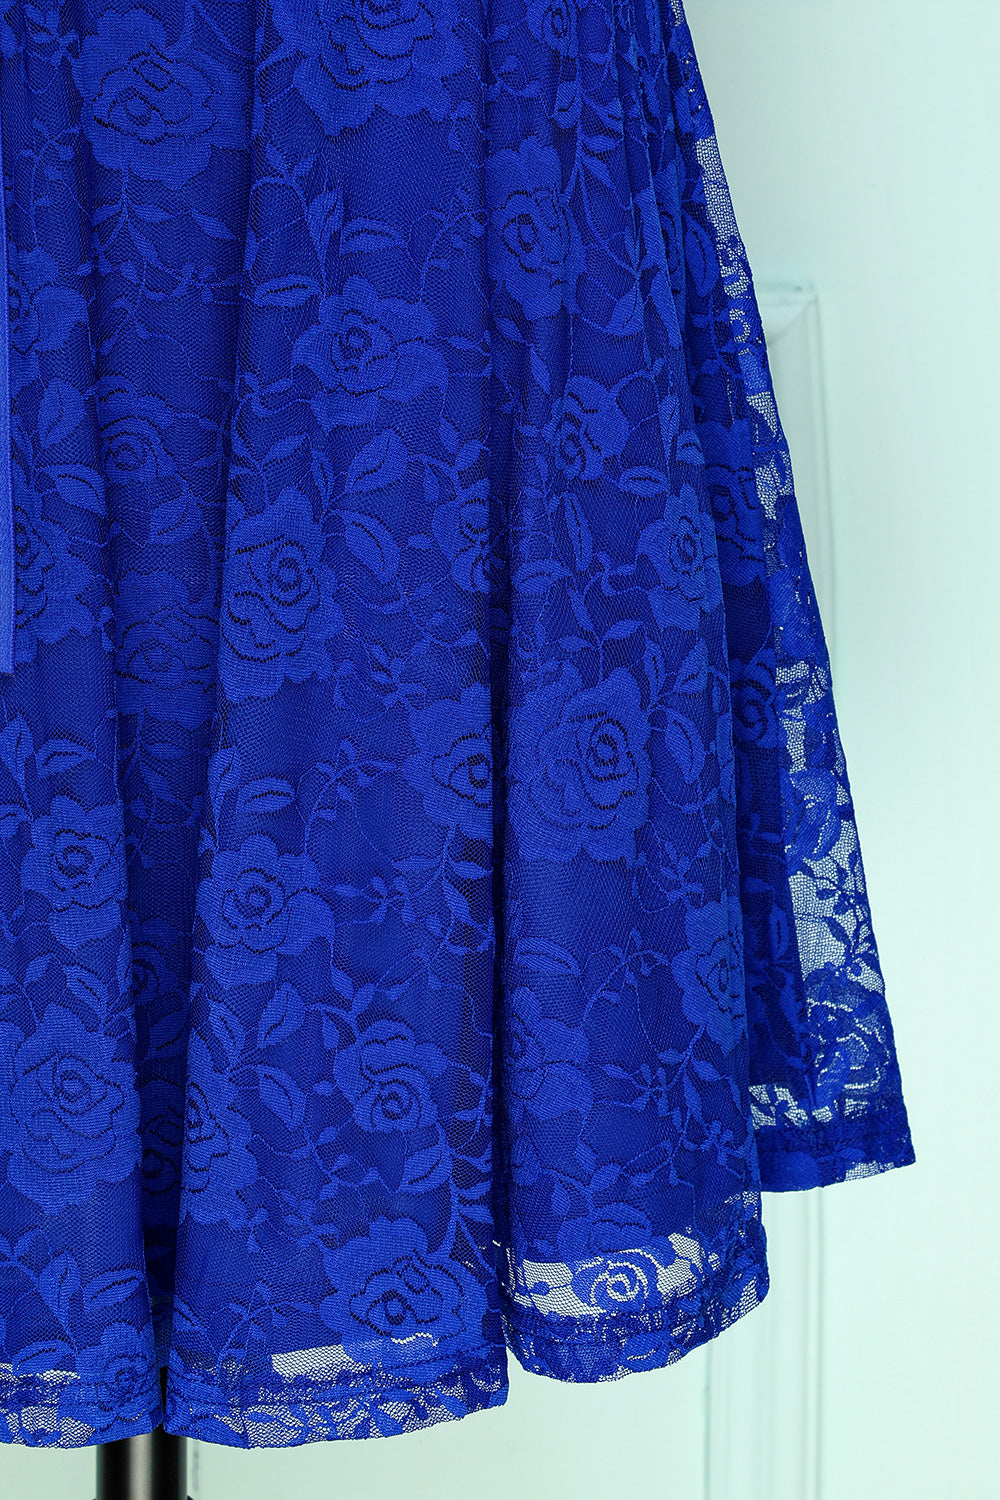 Vintage A Line Royal Blue Round Neck Sleeveless Lace Dress with Sash ...